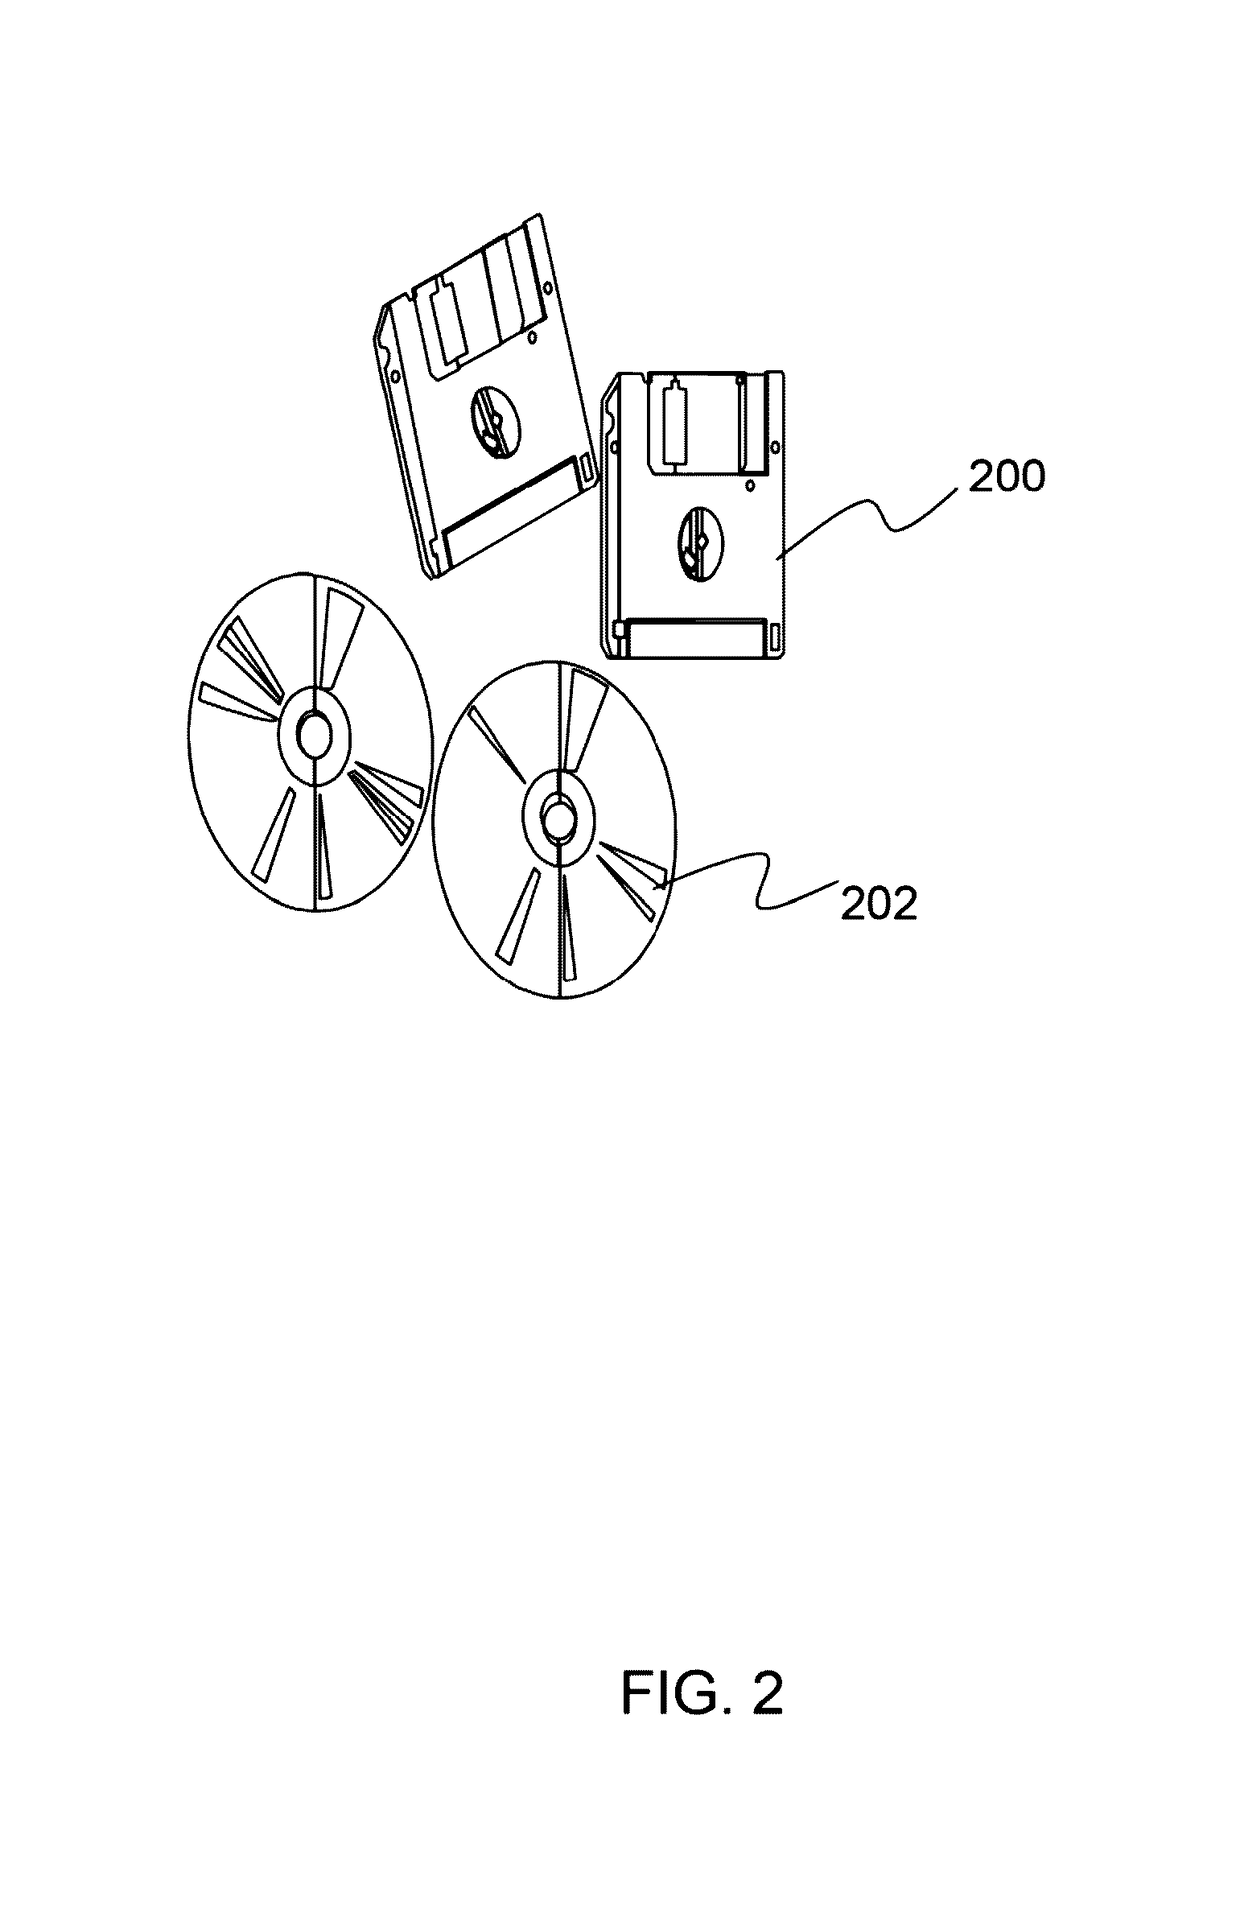 System for filtering, segmenting and recognizing objects in unconstrained environments